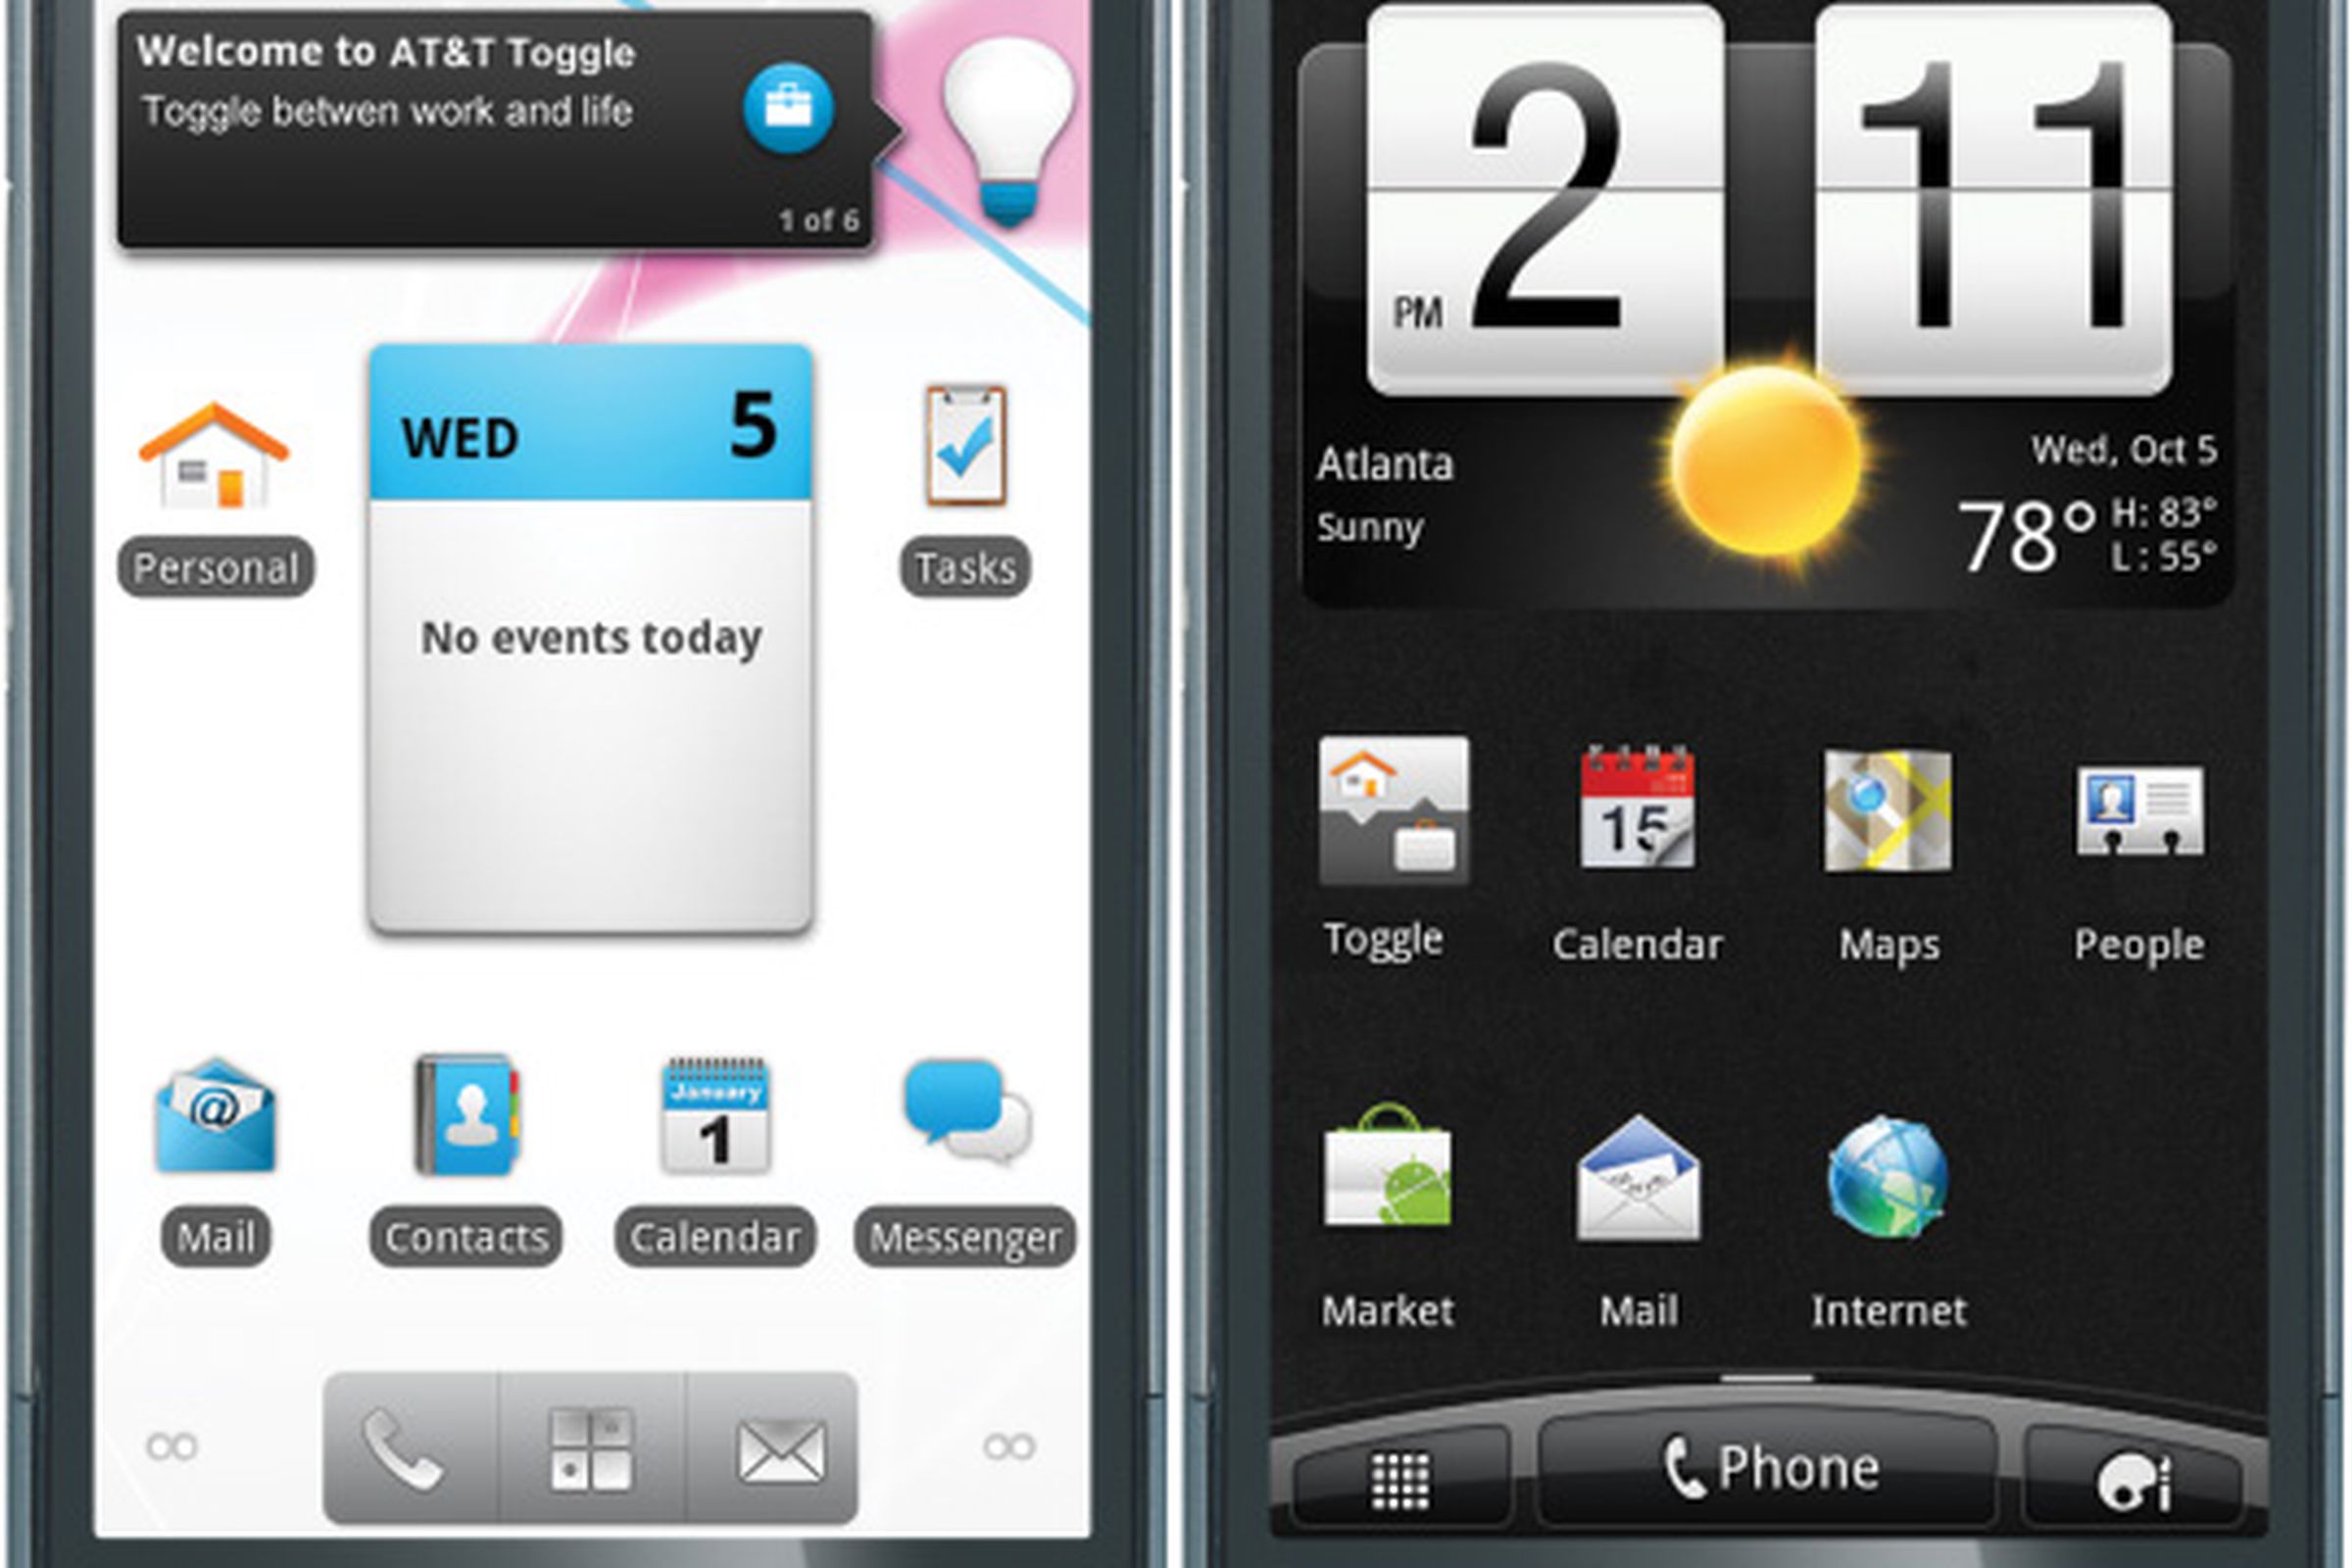 AT&T Toggle on HTC Inspire